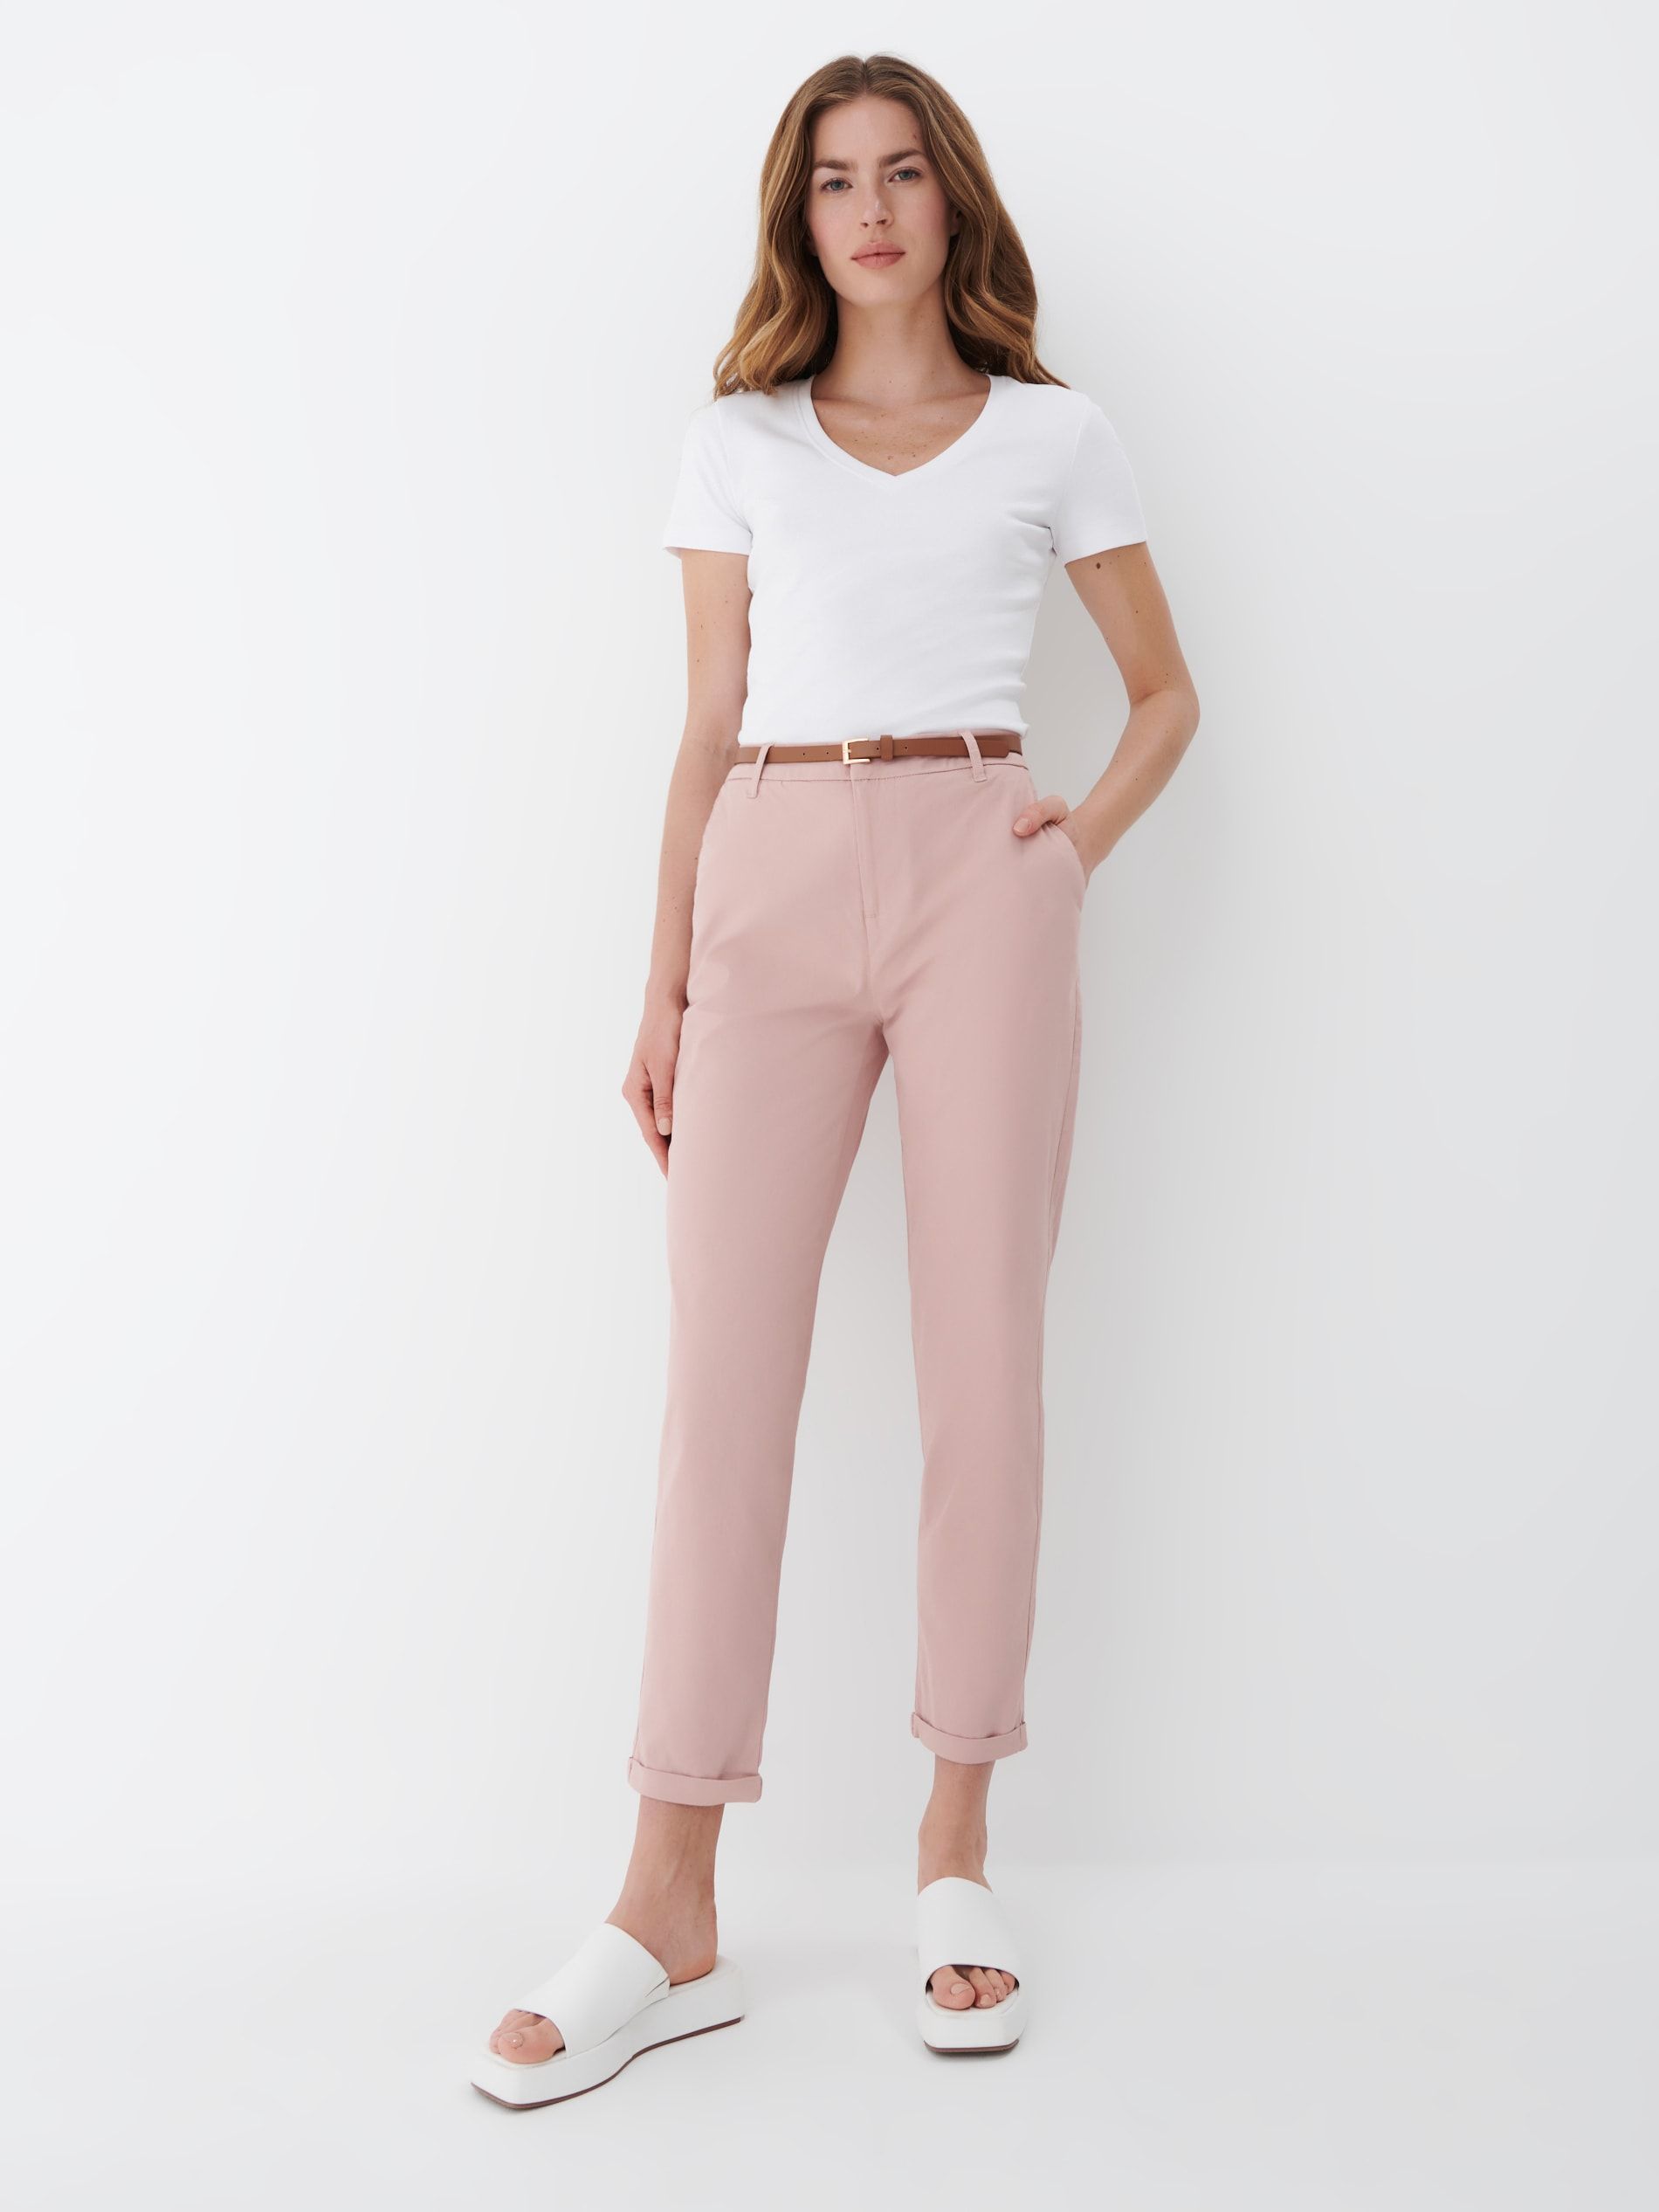 Slim Fit Chinos Outfits for
  Ladies